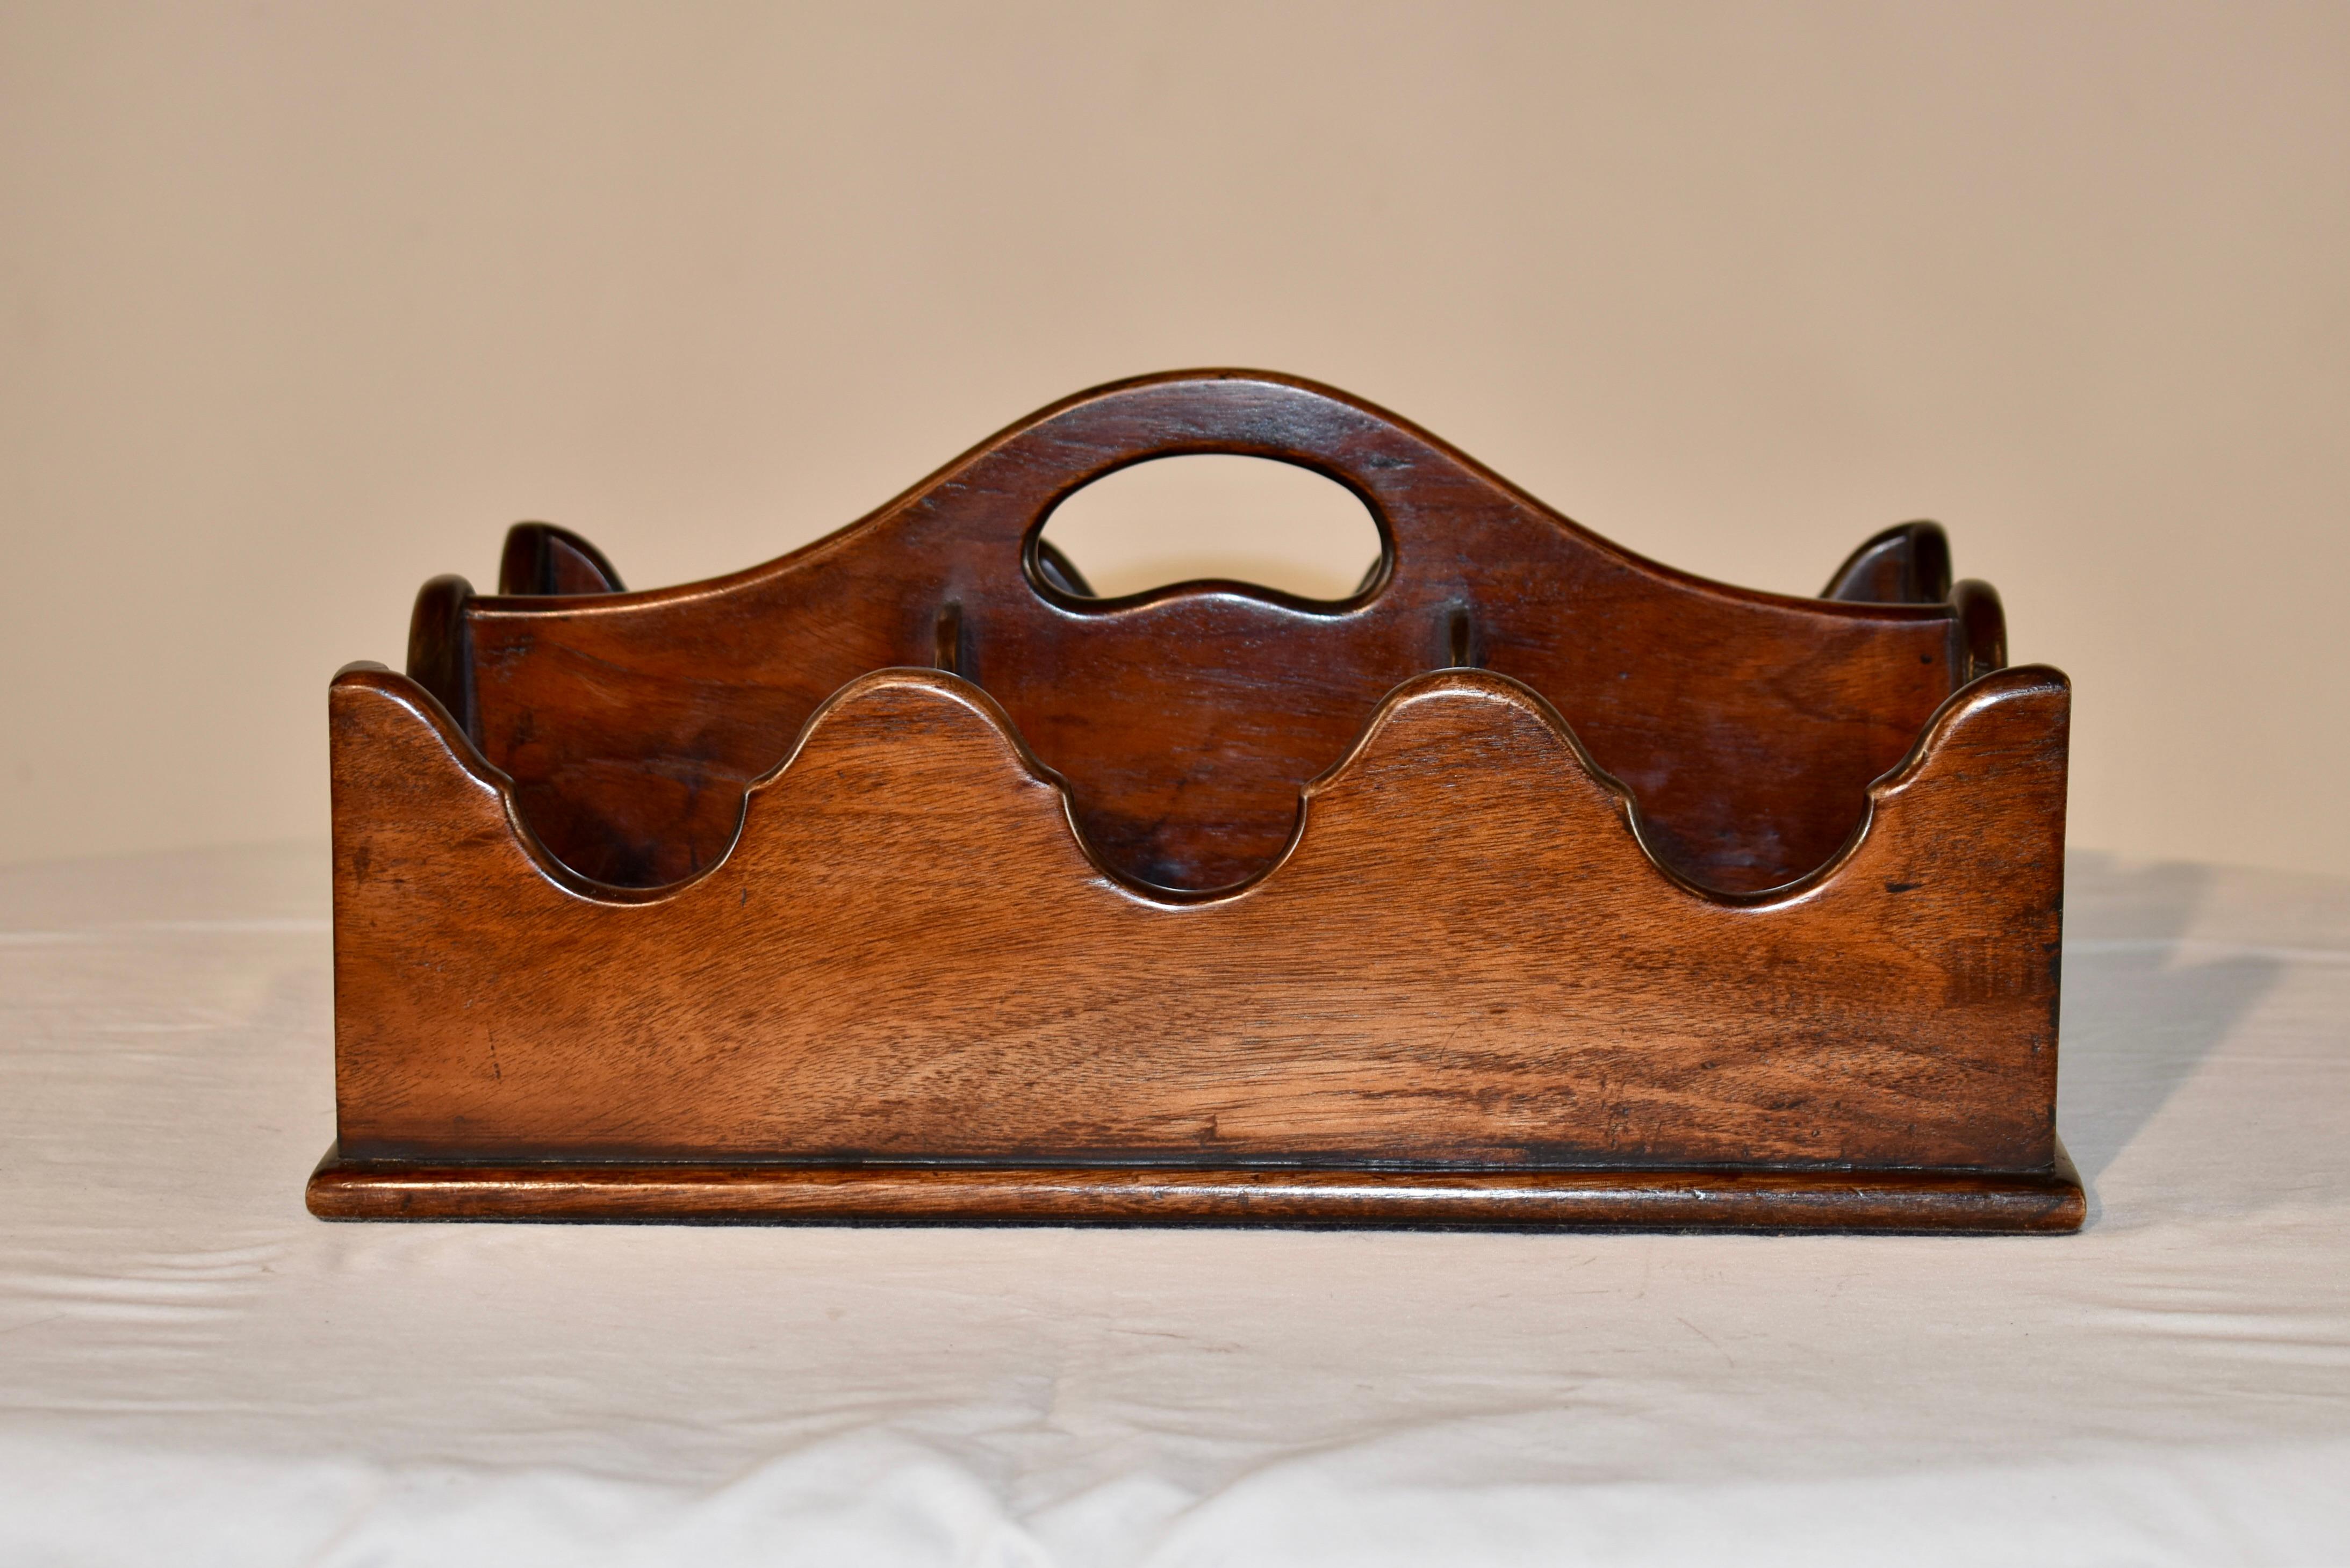 19th century period Georgian English mahogany bottle holder with six compartments. Each compartment has scalloped solid sides and all of the compartments are connected by a central shaped handle.